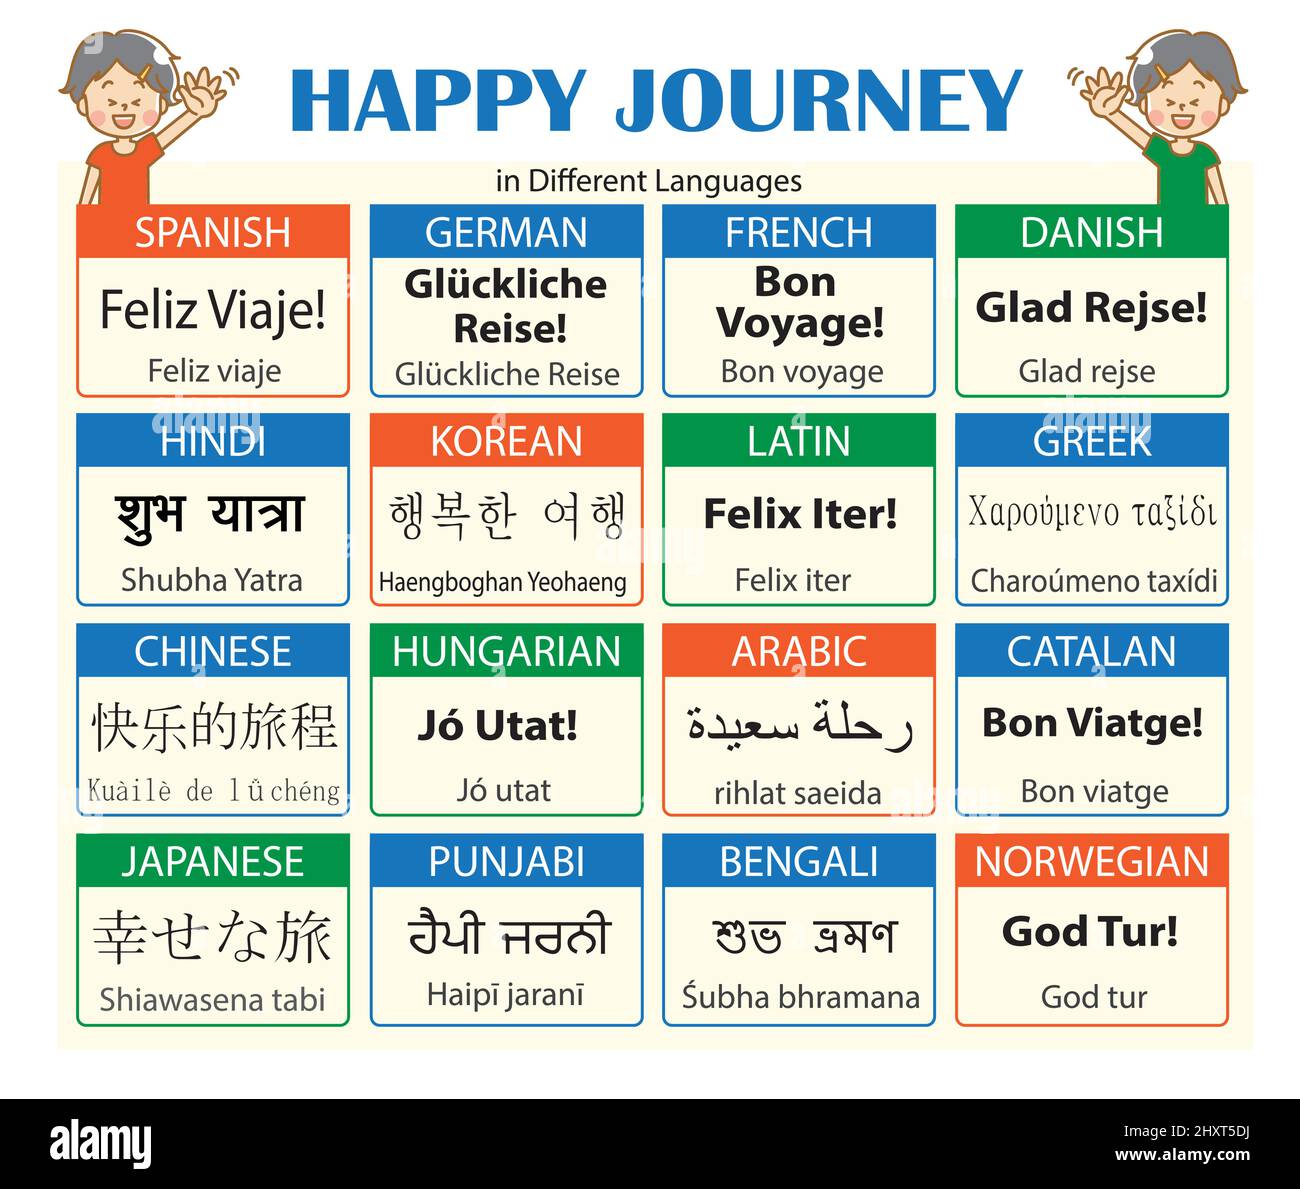 Happy Journey in Different Languages for Office, School, Airport Wallpaper Stock Vector